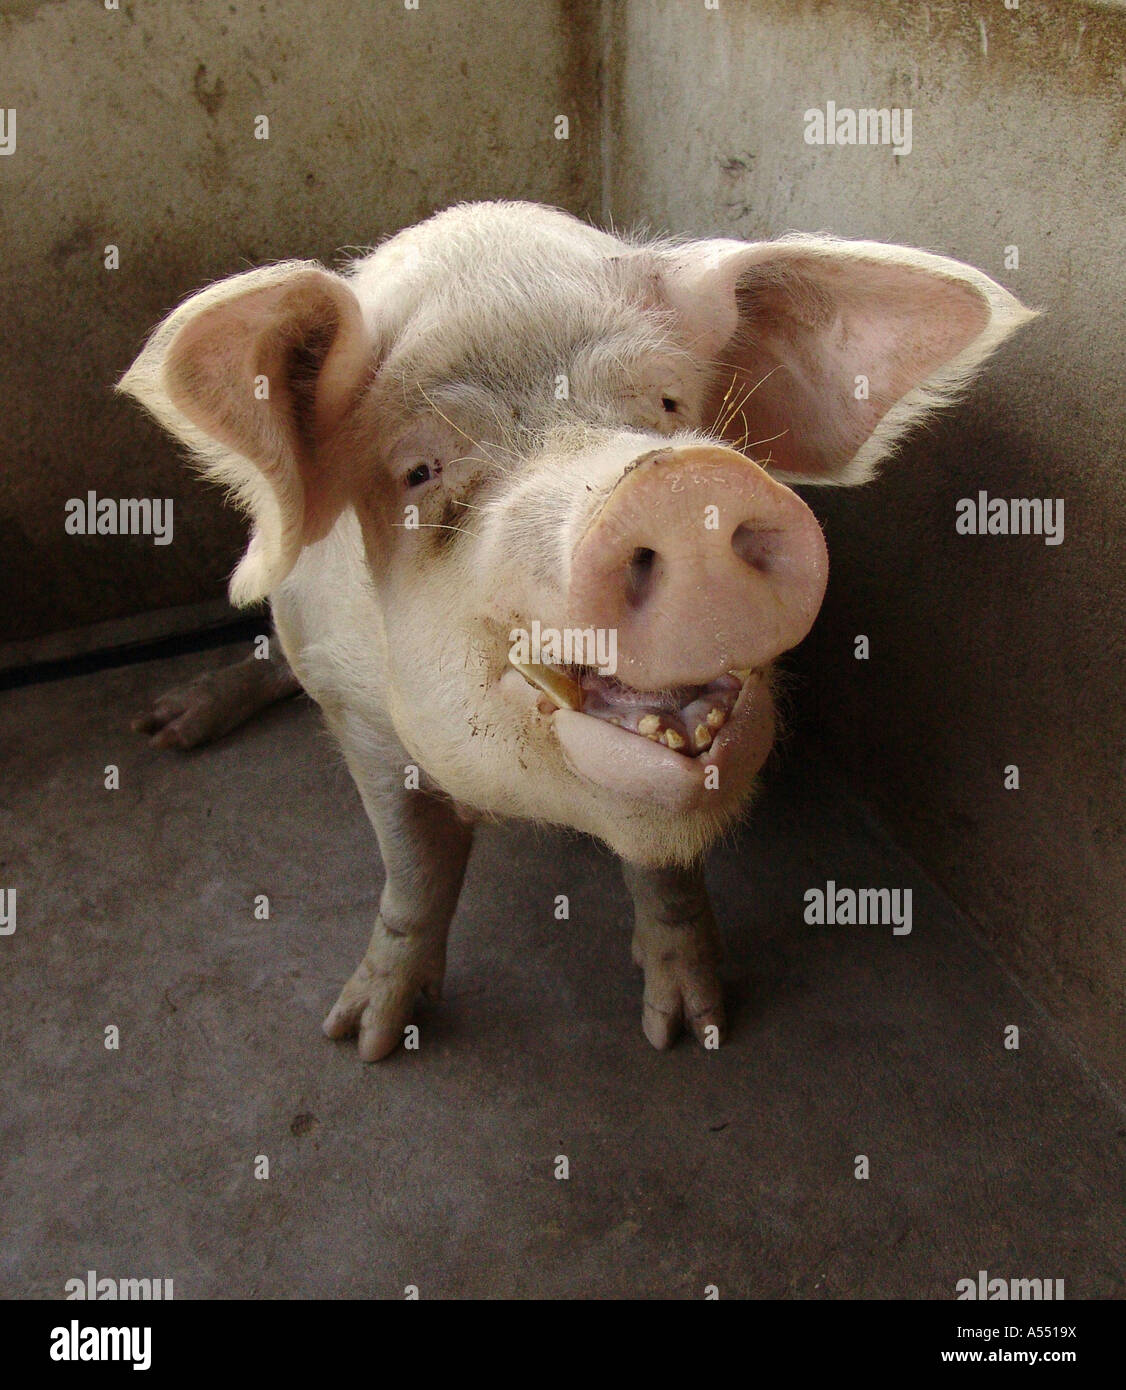 Painet ip2325 nicaragua pig jalapa country developing nation less economically developed culture emerging market minority Stock Photo